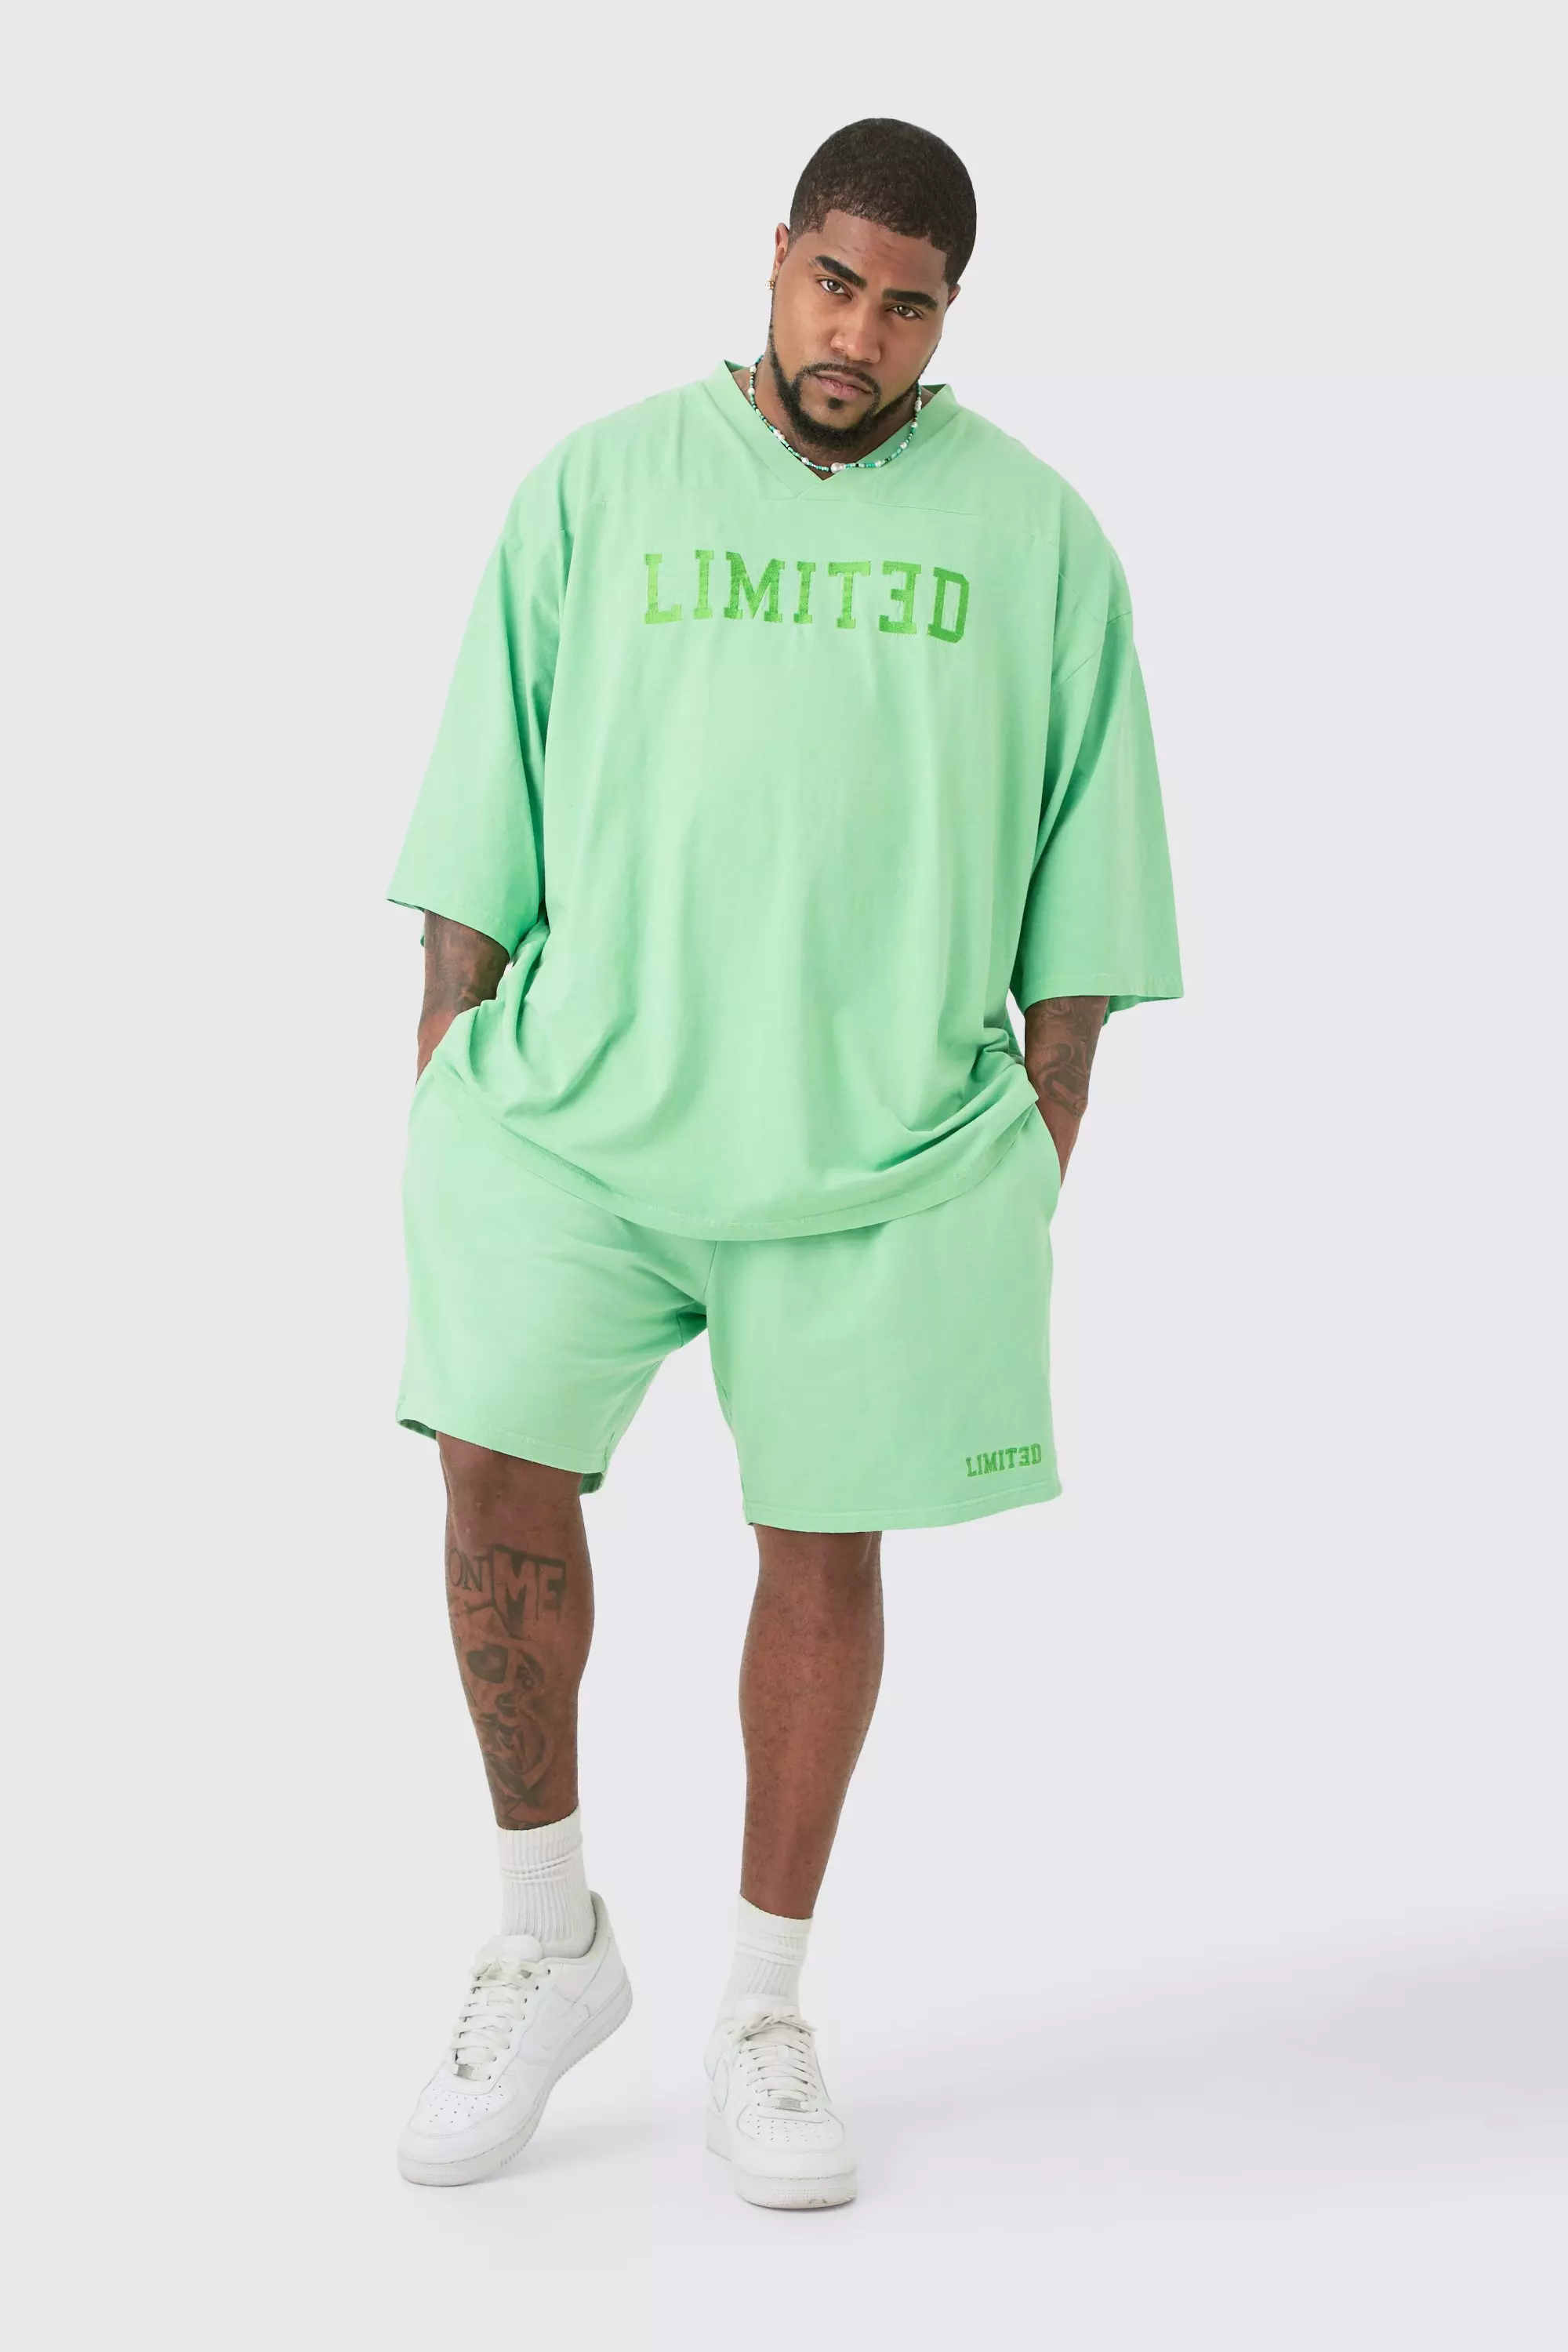 Plus Embroidered Limited Football T-shirt & Short Set Green